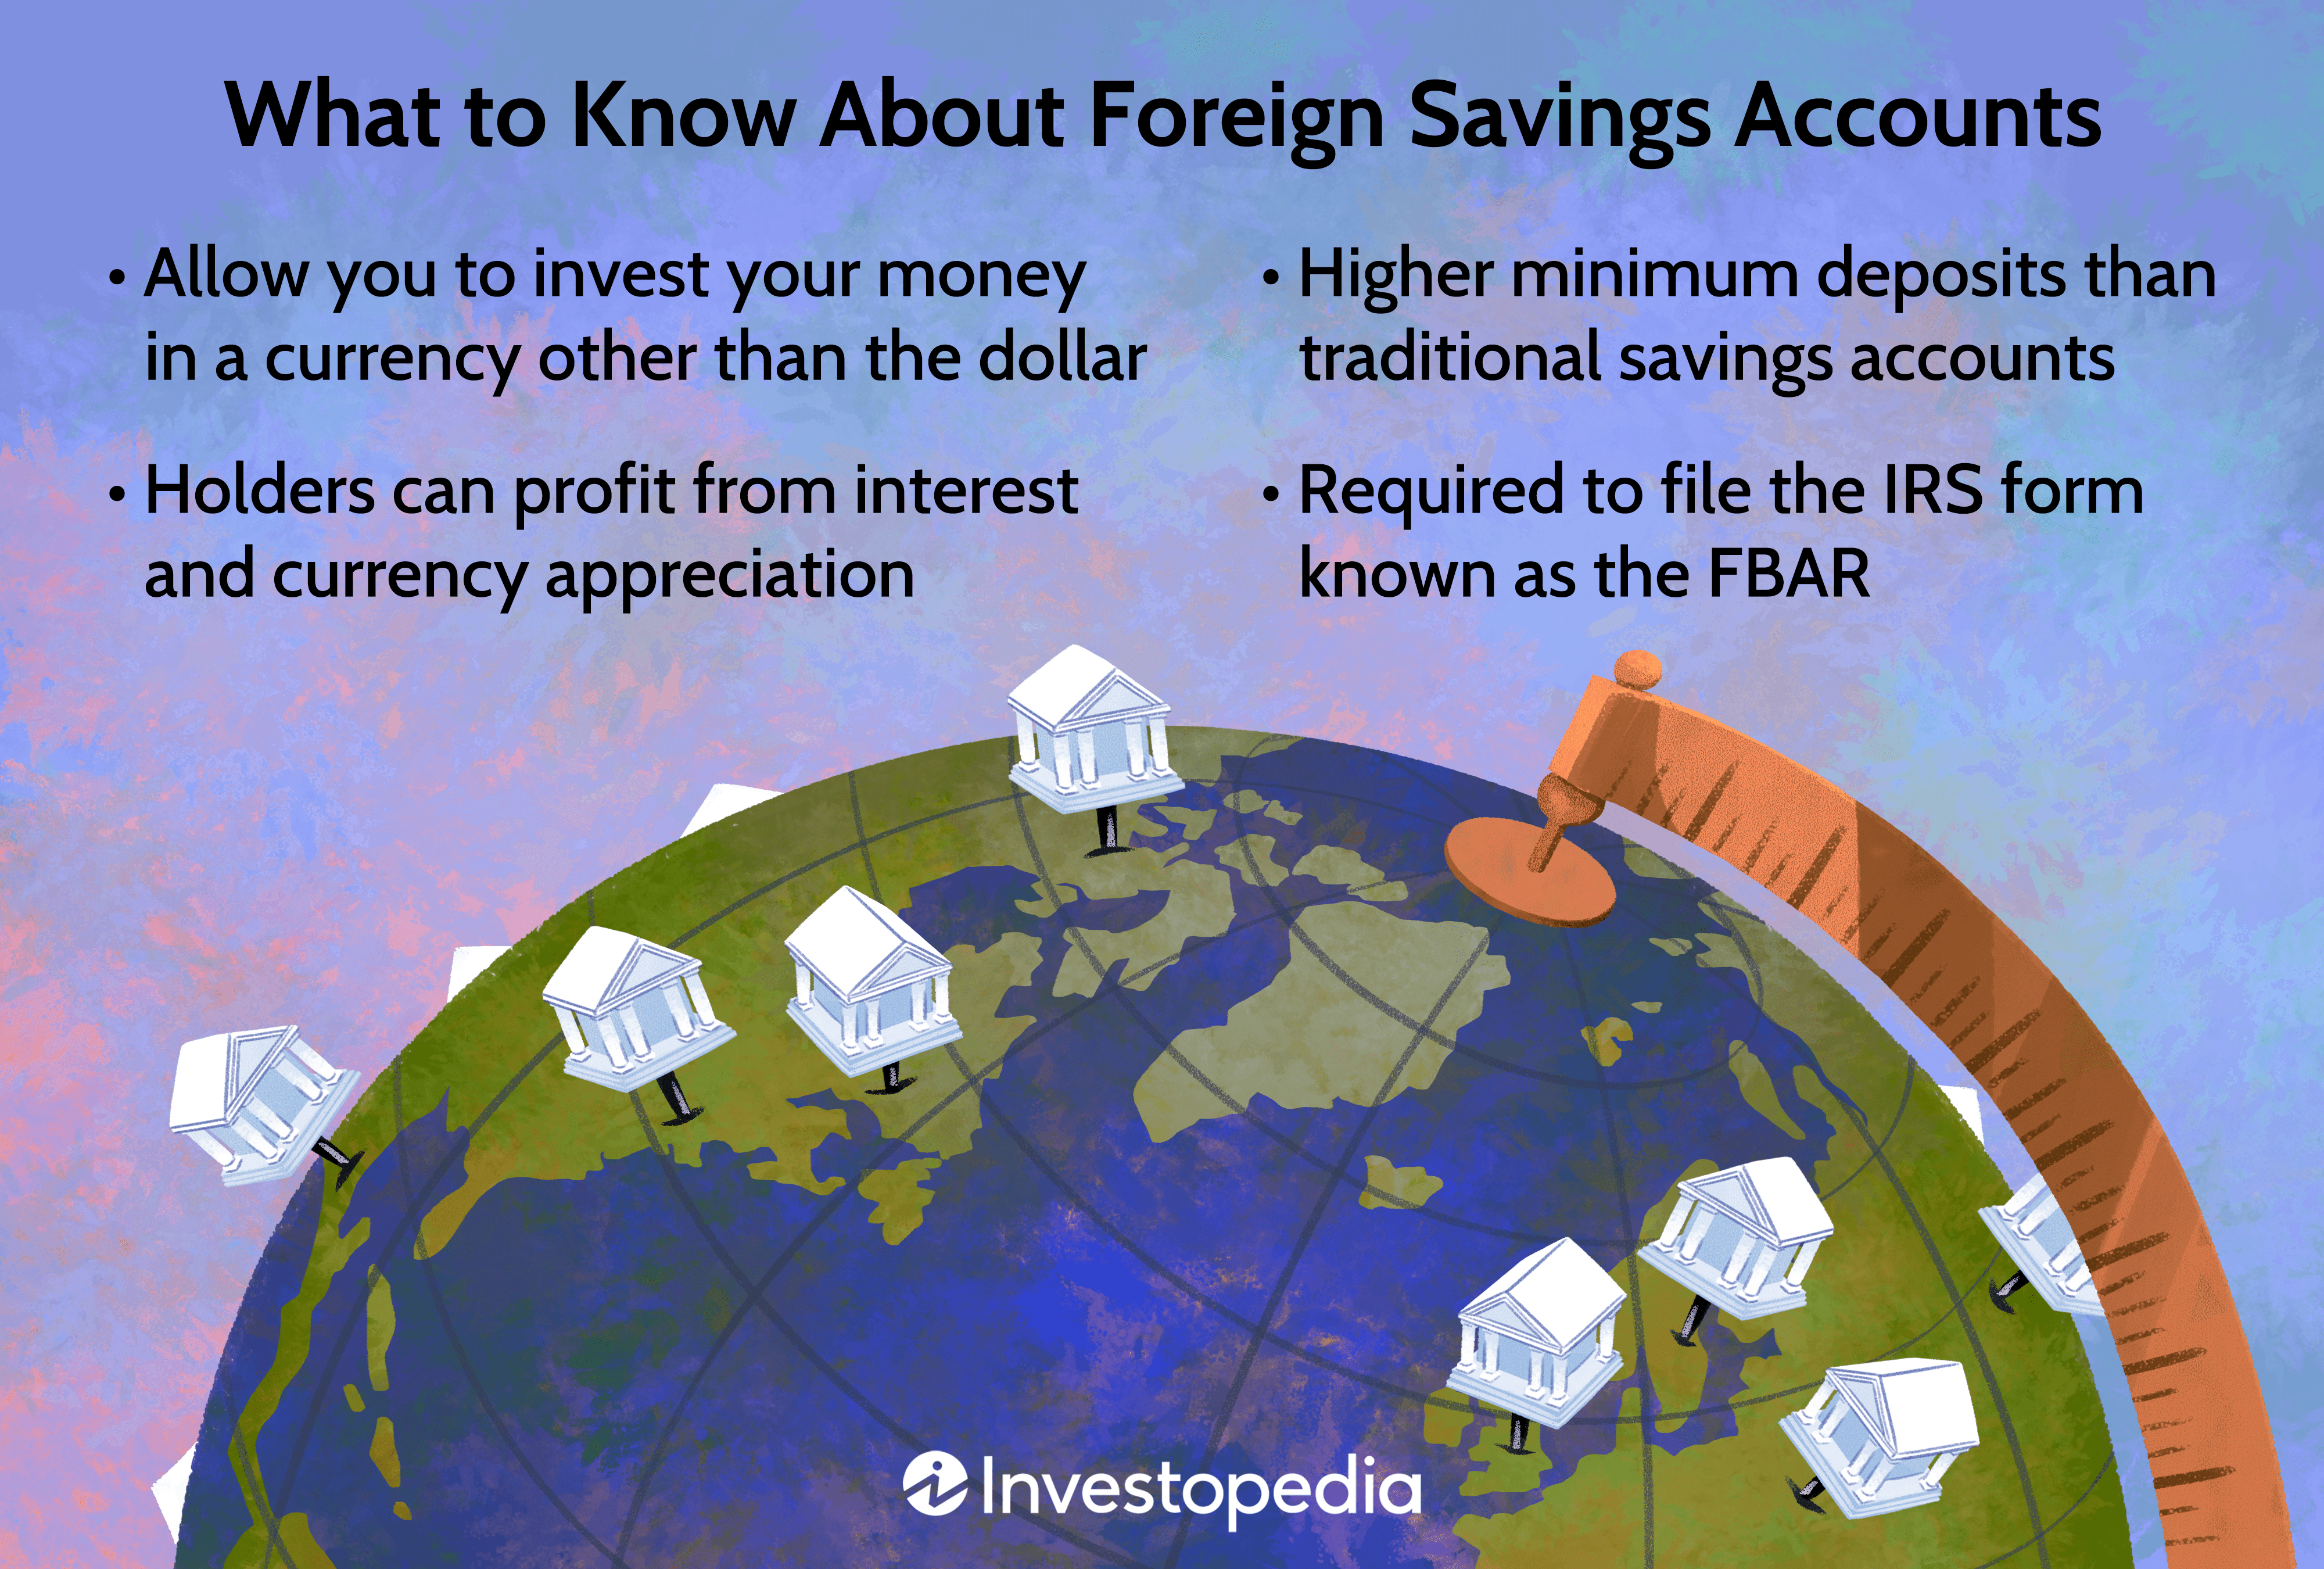 What to Know About Foreign Savings Accounts